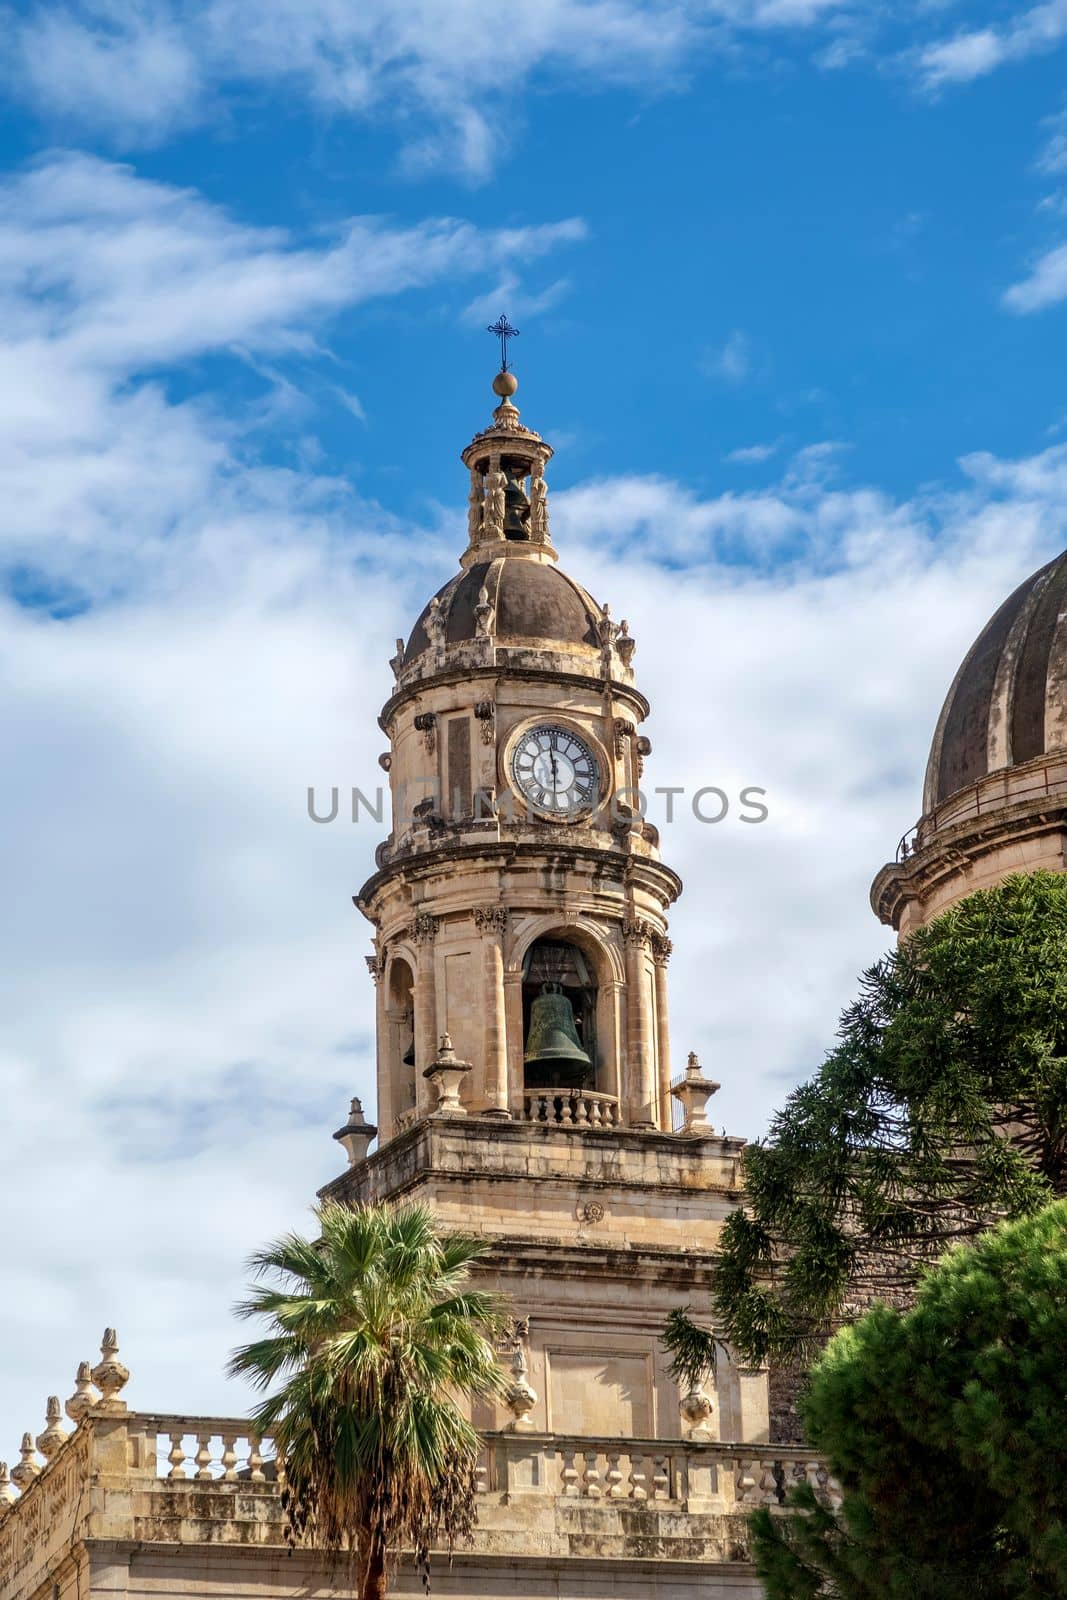 Clock tower of the Cathedral of Saint Agatha in Catania, Sicily, Italy